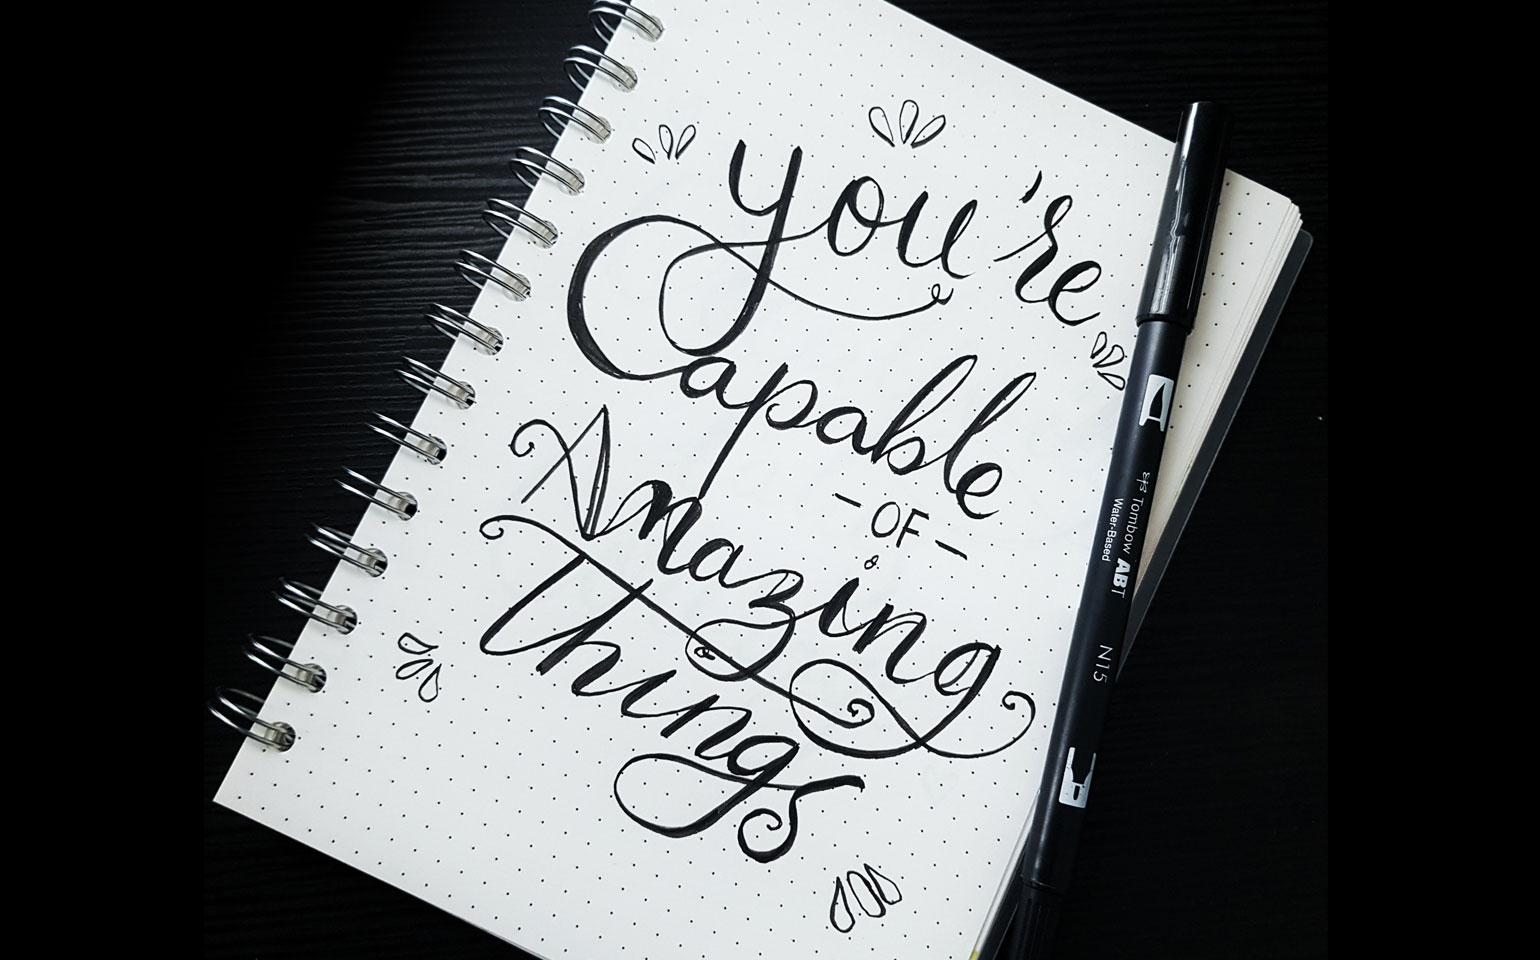 A notepad that reads "You're capable of amazing things" is shown. This is an example of a positive affirmation.